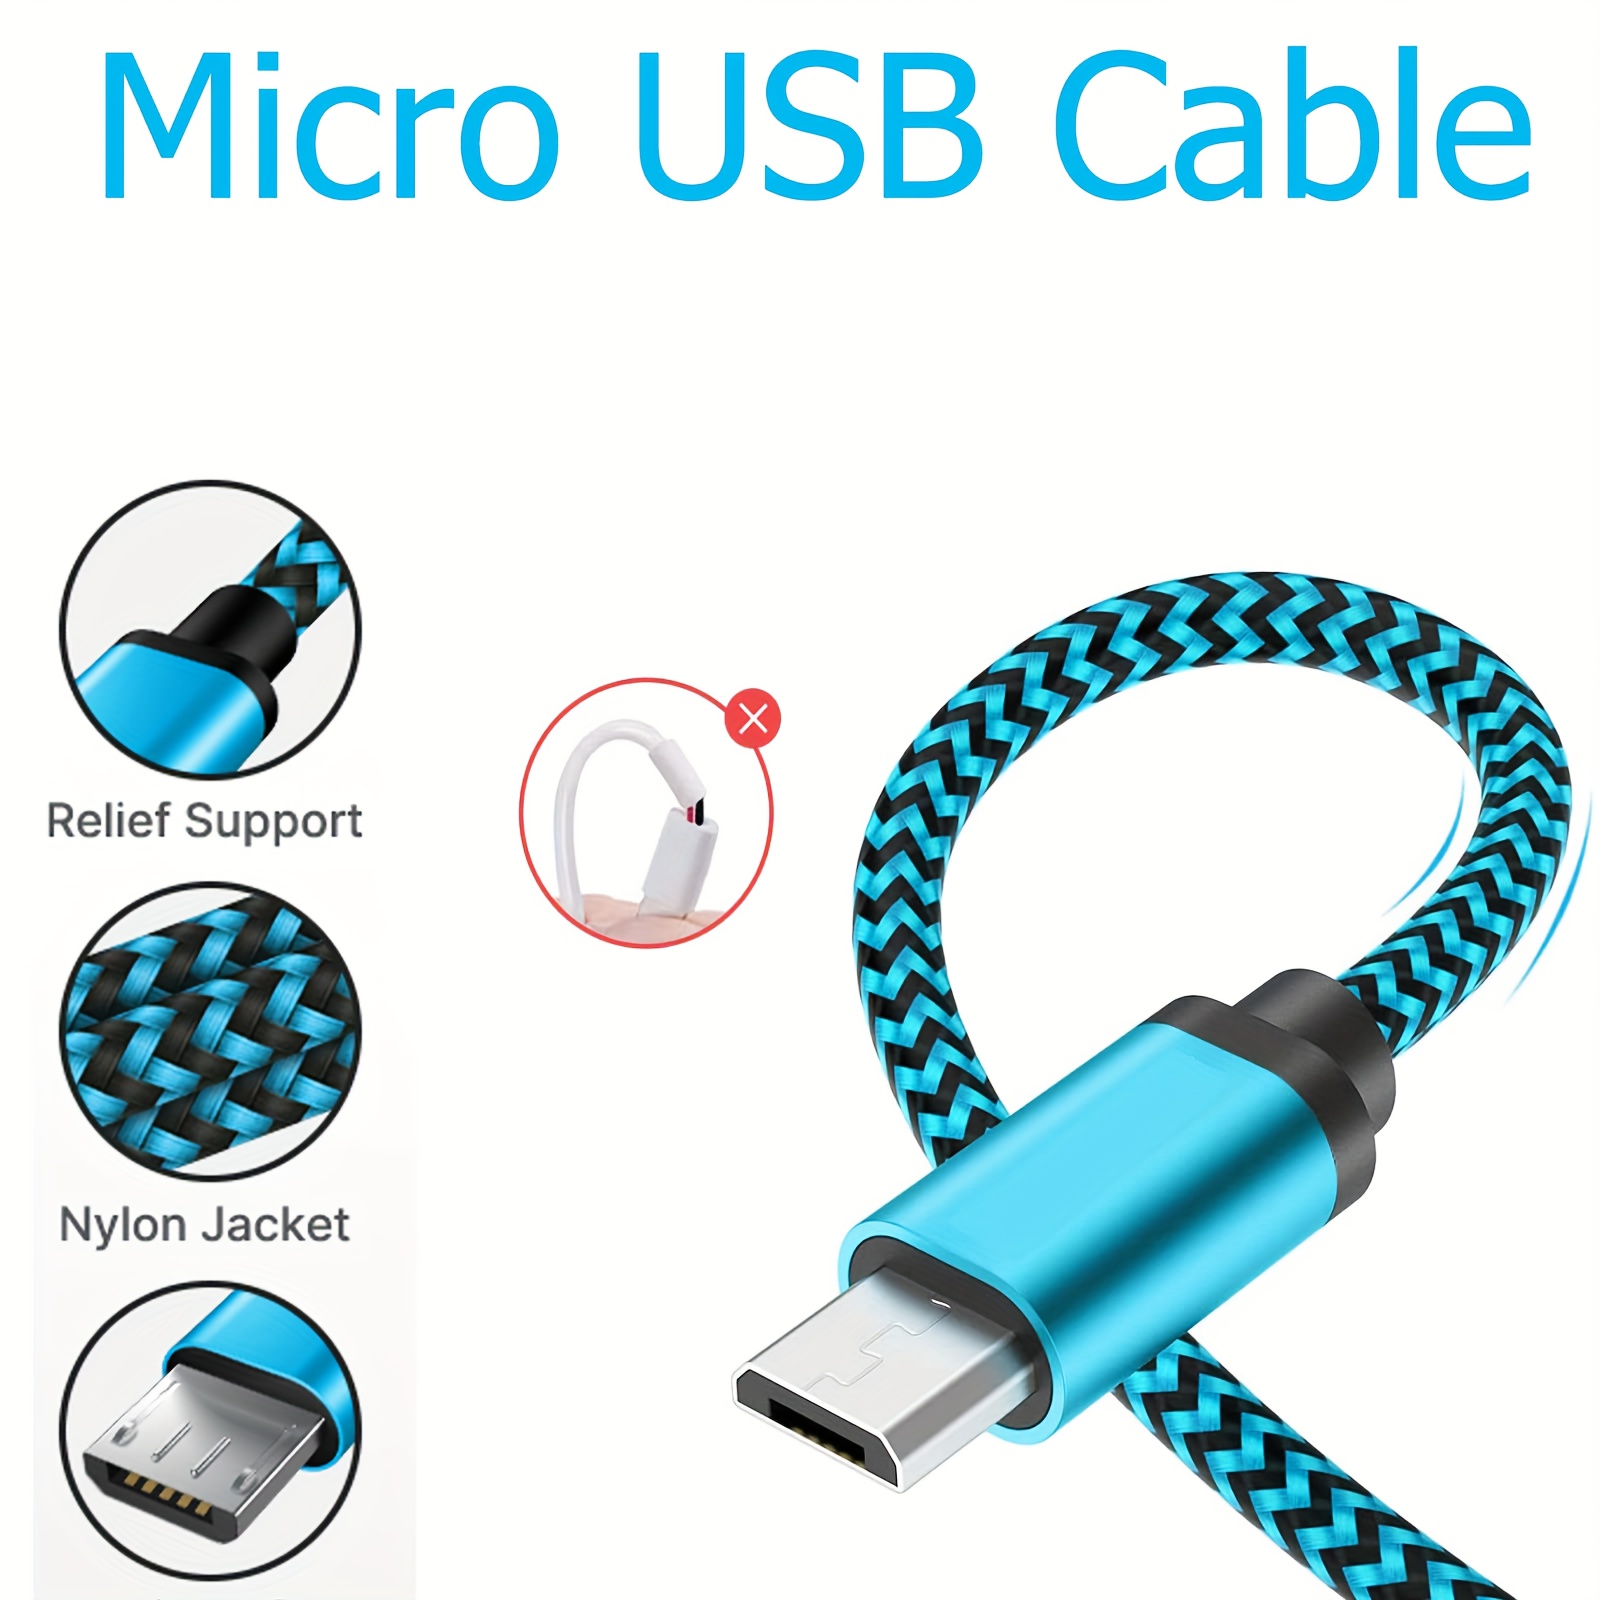 Micro USB Cable USB 2.0 A-Male to Micro B Cable Fast Charging Cord High  Speed USB Durable Android Charger Cable (3 Pack, 3ft)